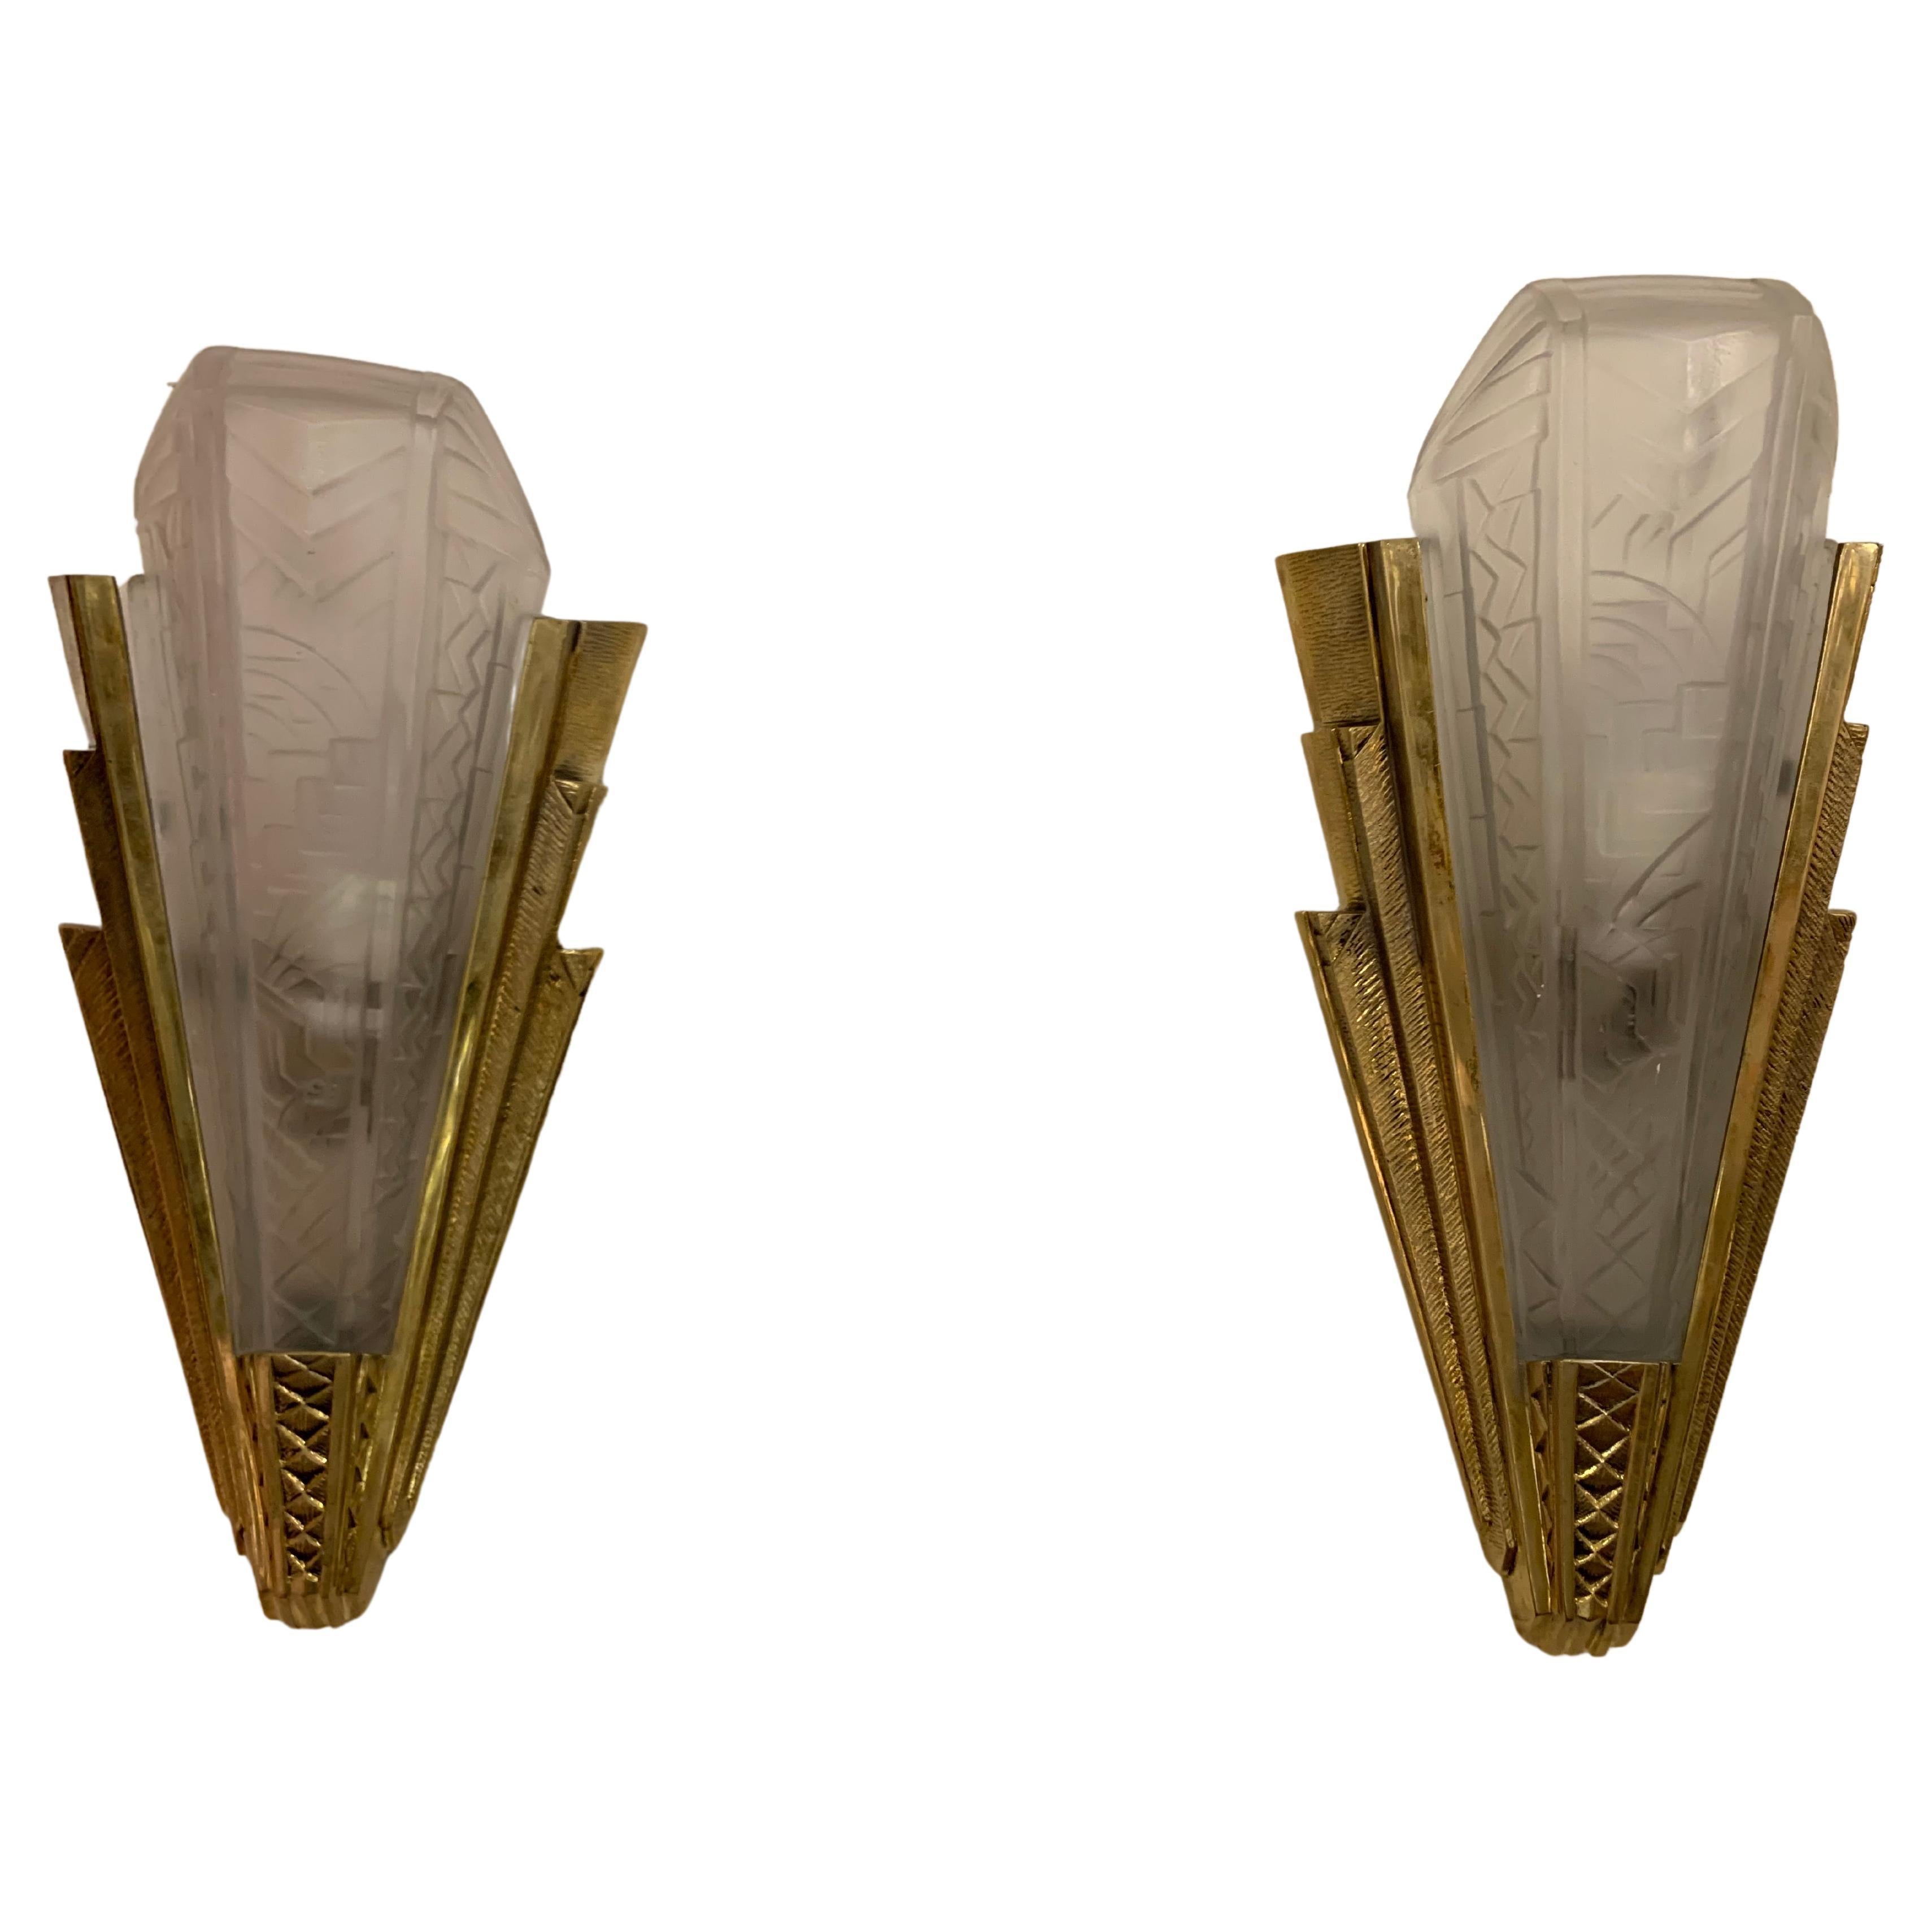 Pair of Vintage French Art Deco Sconces For Sale